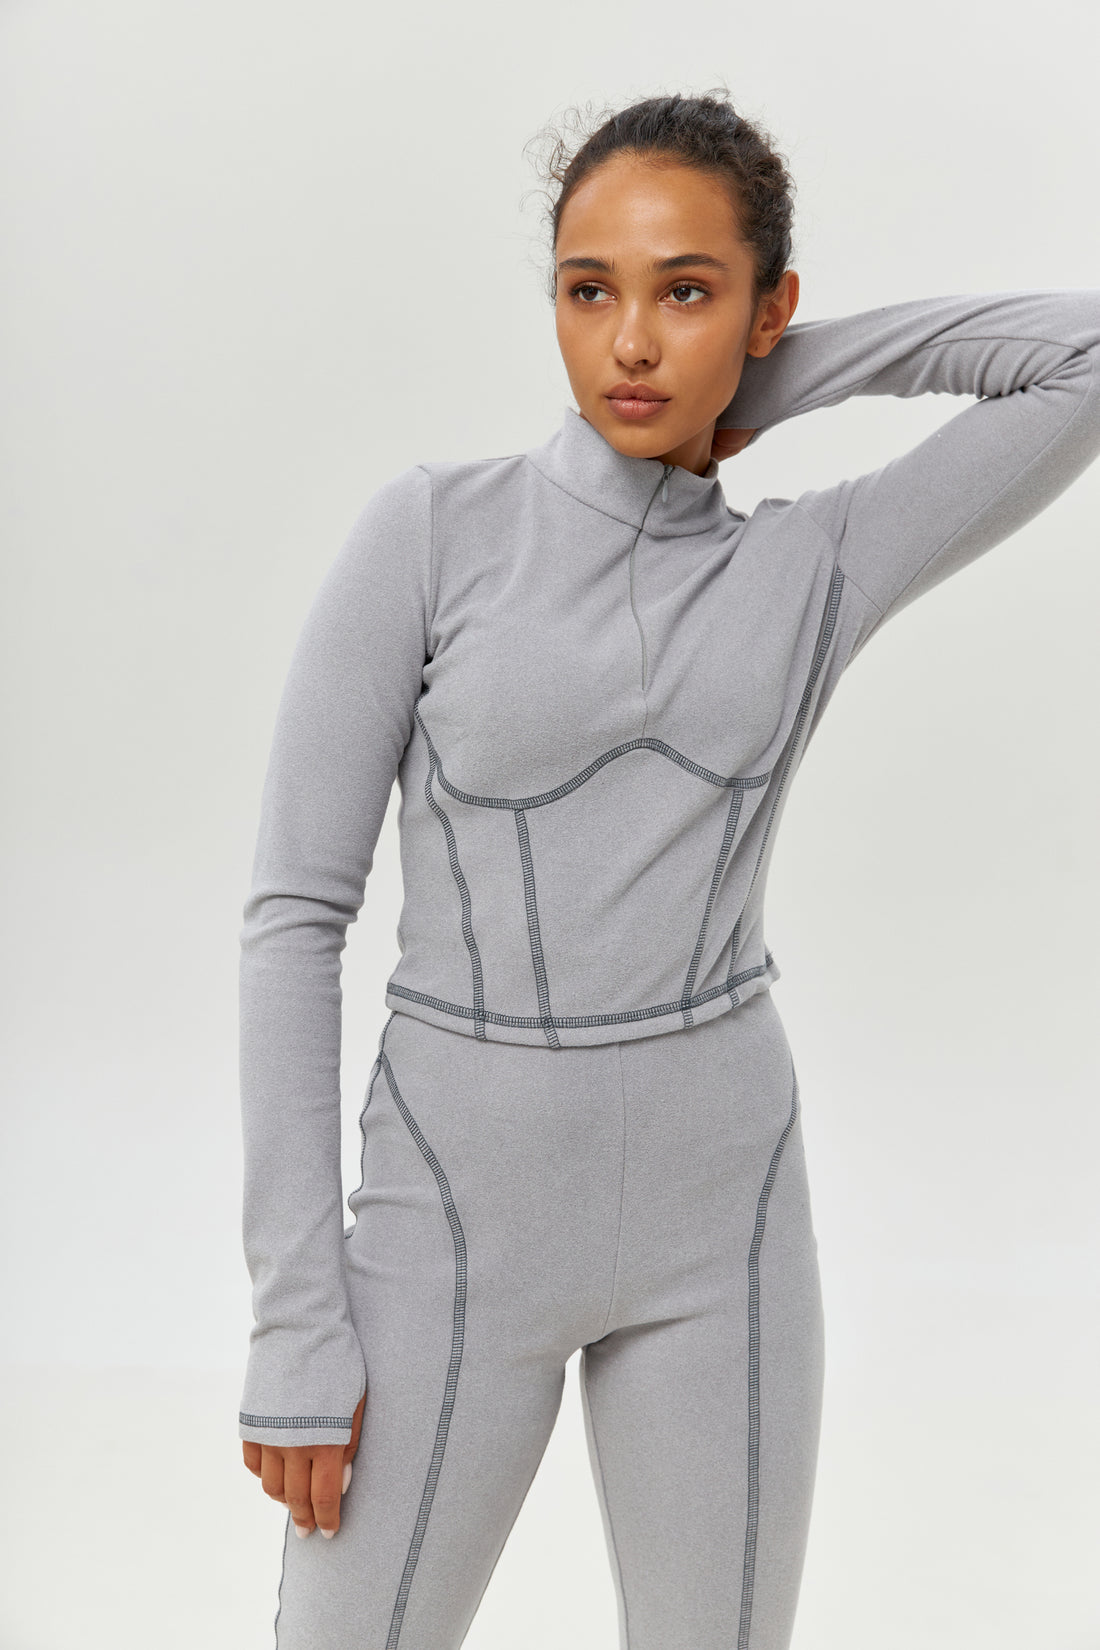 Female base layer - Light grey two piece set for winter - Long johns for women